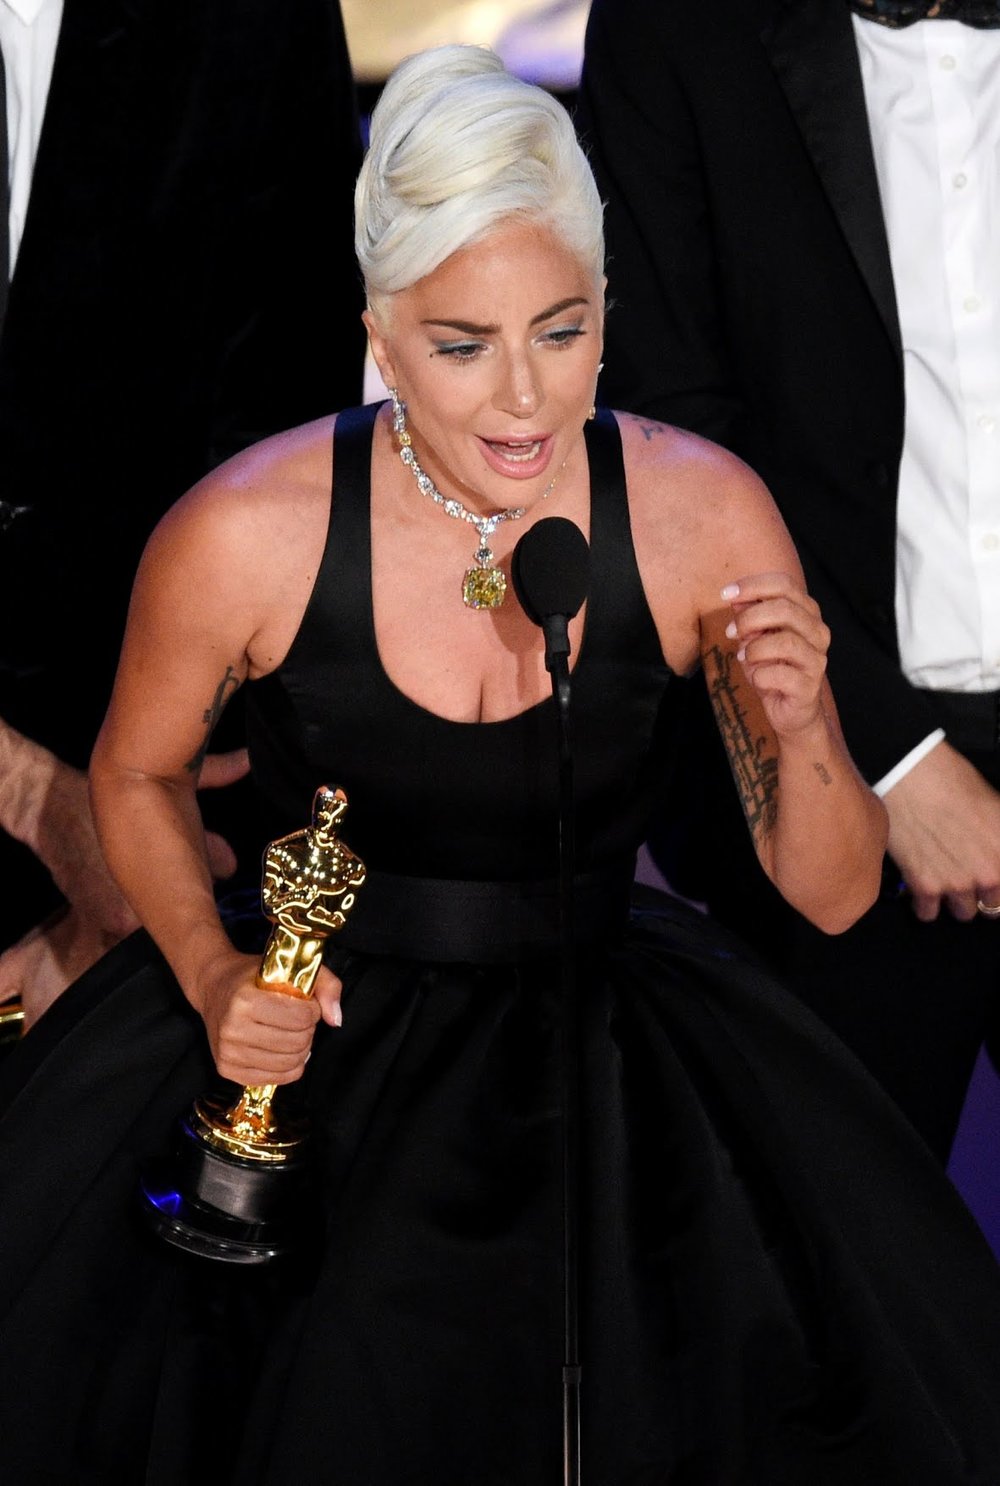 Lady Gaga accepts the award for best original song for Shallowfrom A Star Is Born